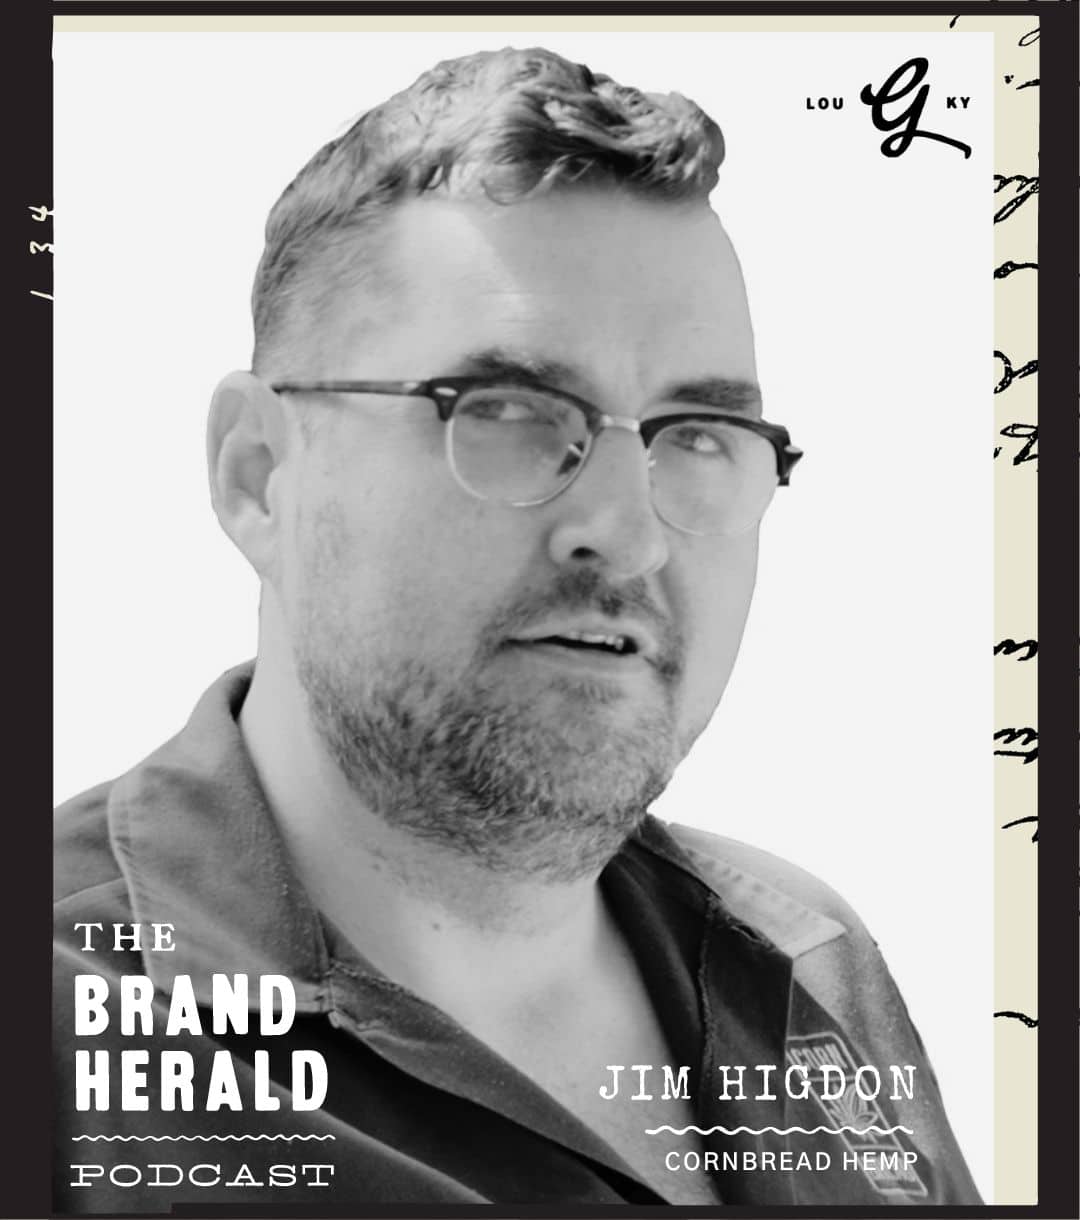 Image of Jim Higdon with The Brand Herald podcast overlayed on top.